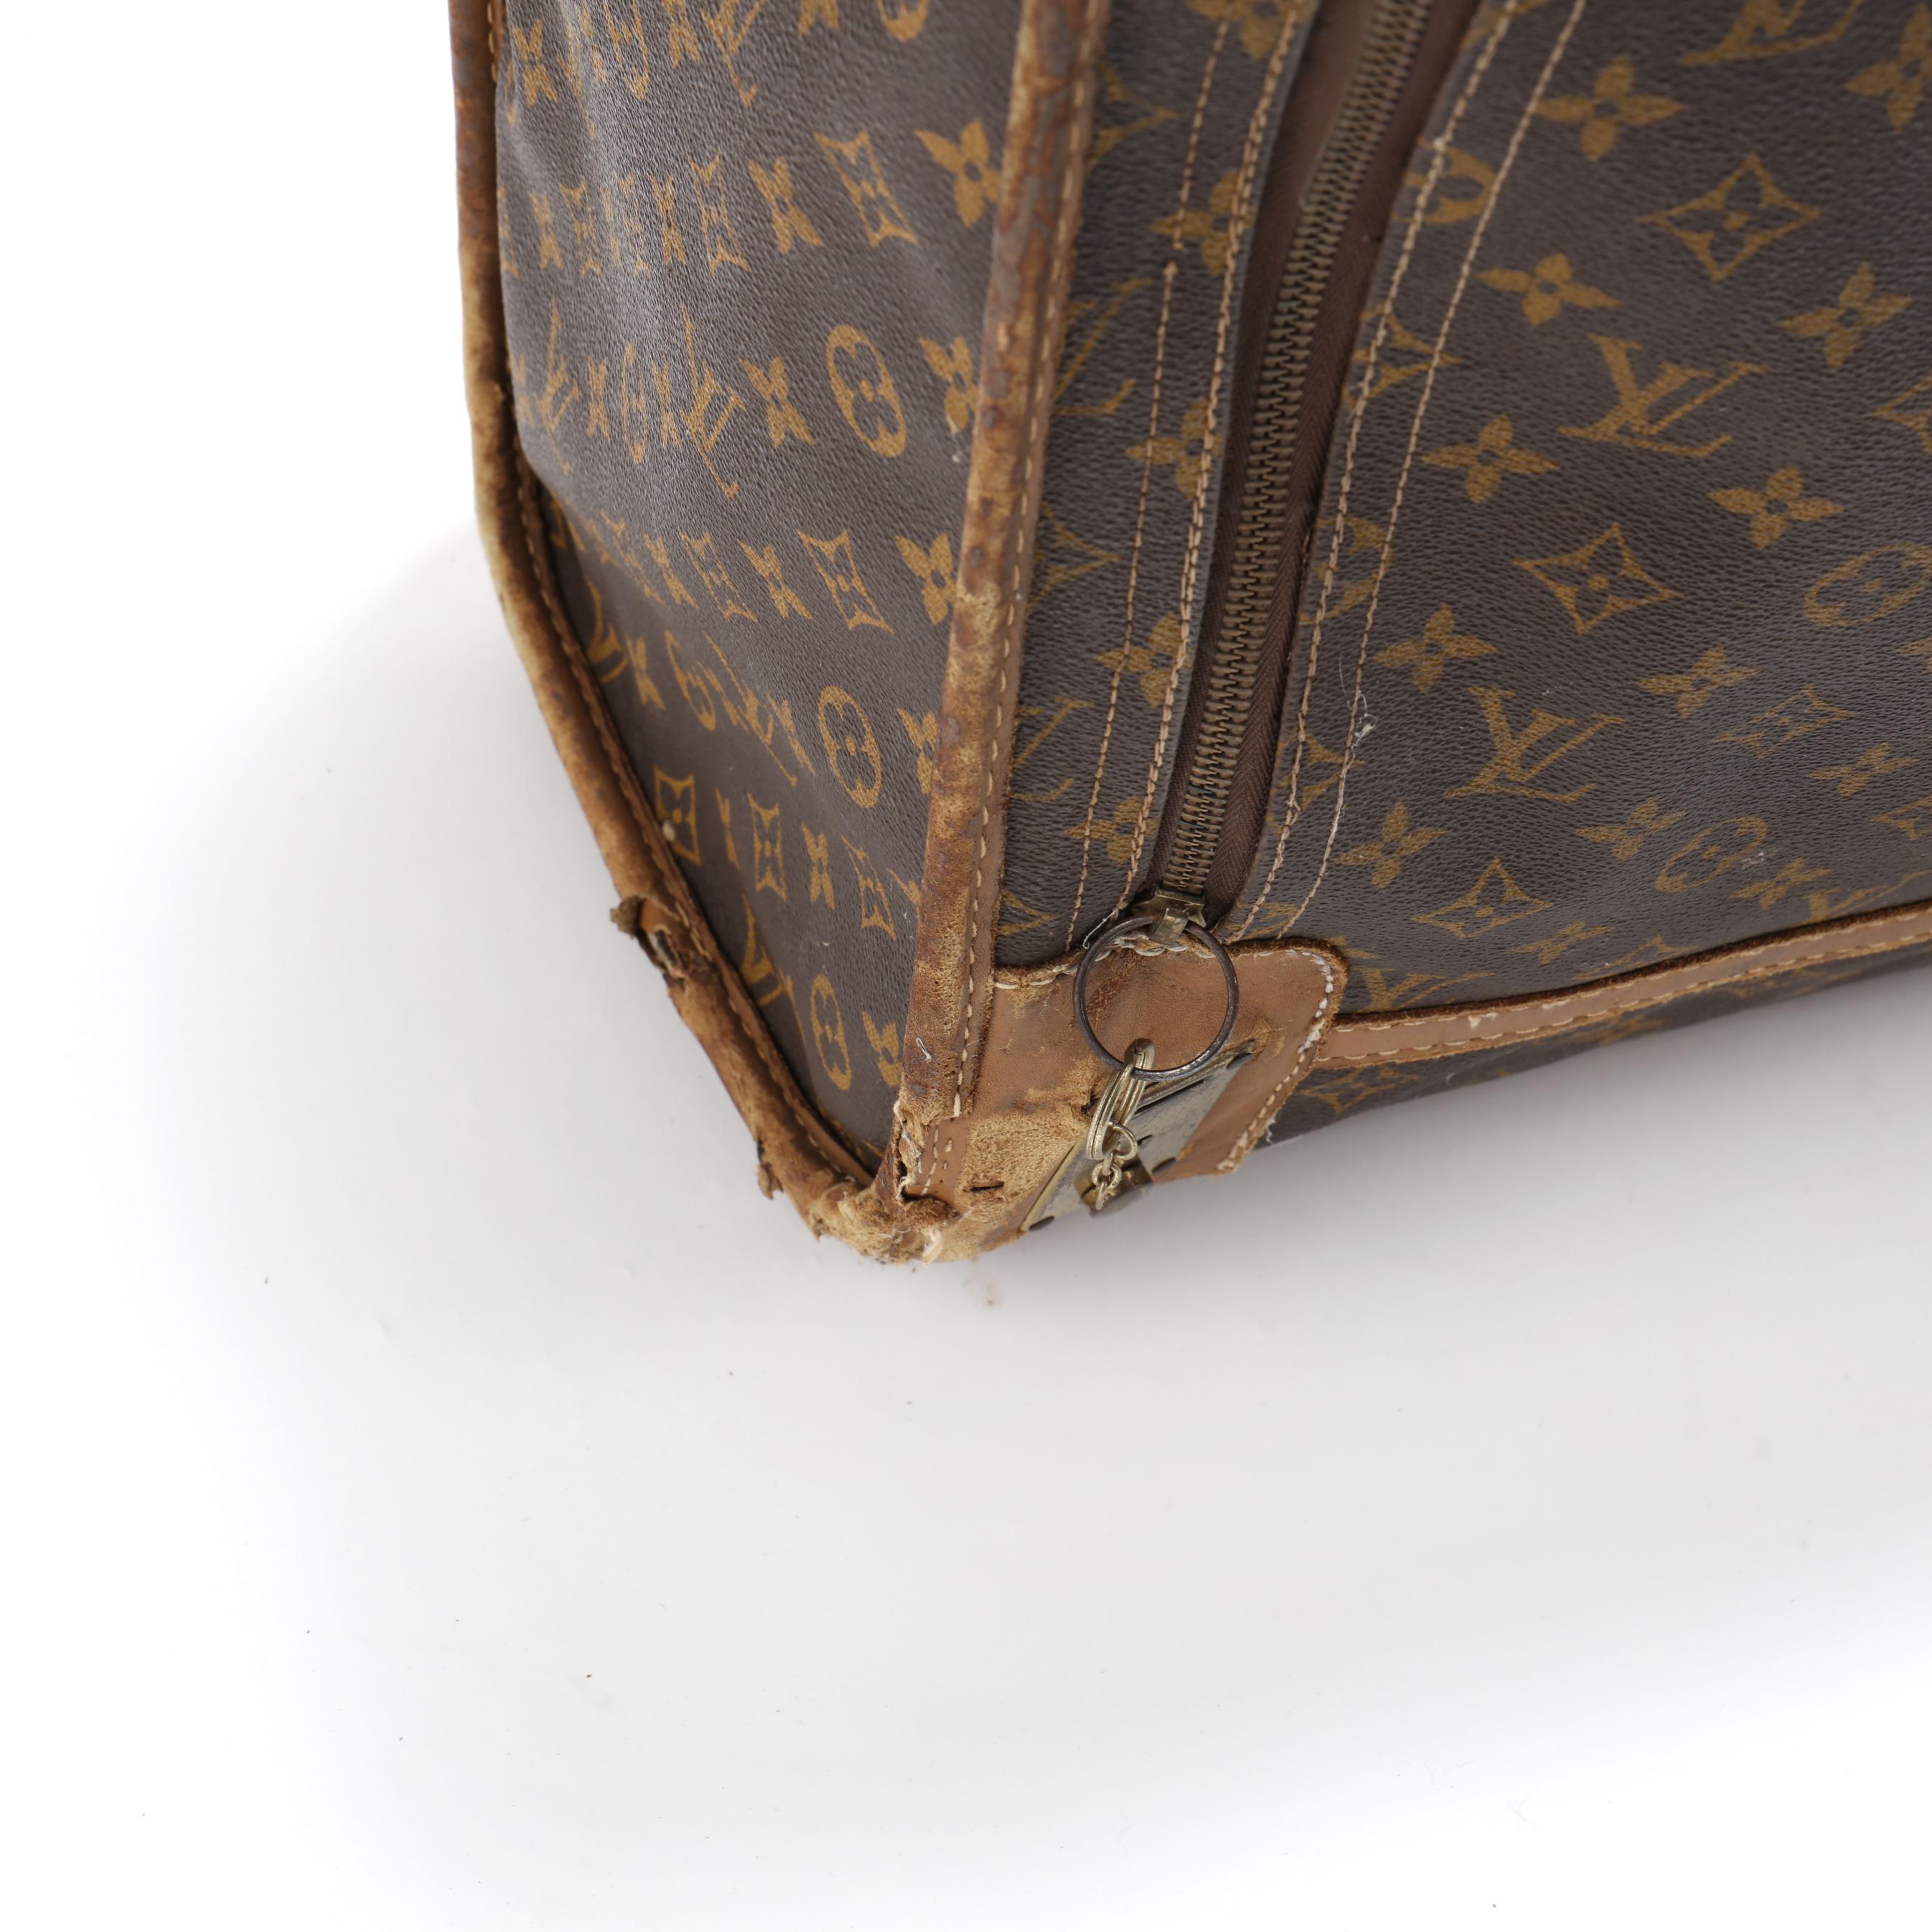 French Company for Louis Vuitton Shoe Bag and Pullman Suitcase (Lot 1007 -  Estate Jewelry & FashionSep 15, 2022, 10:00am)